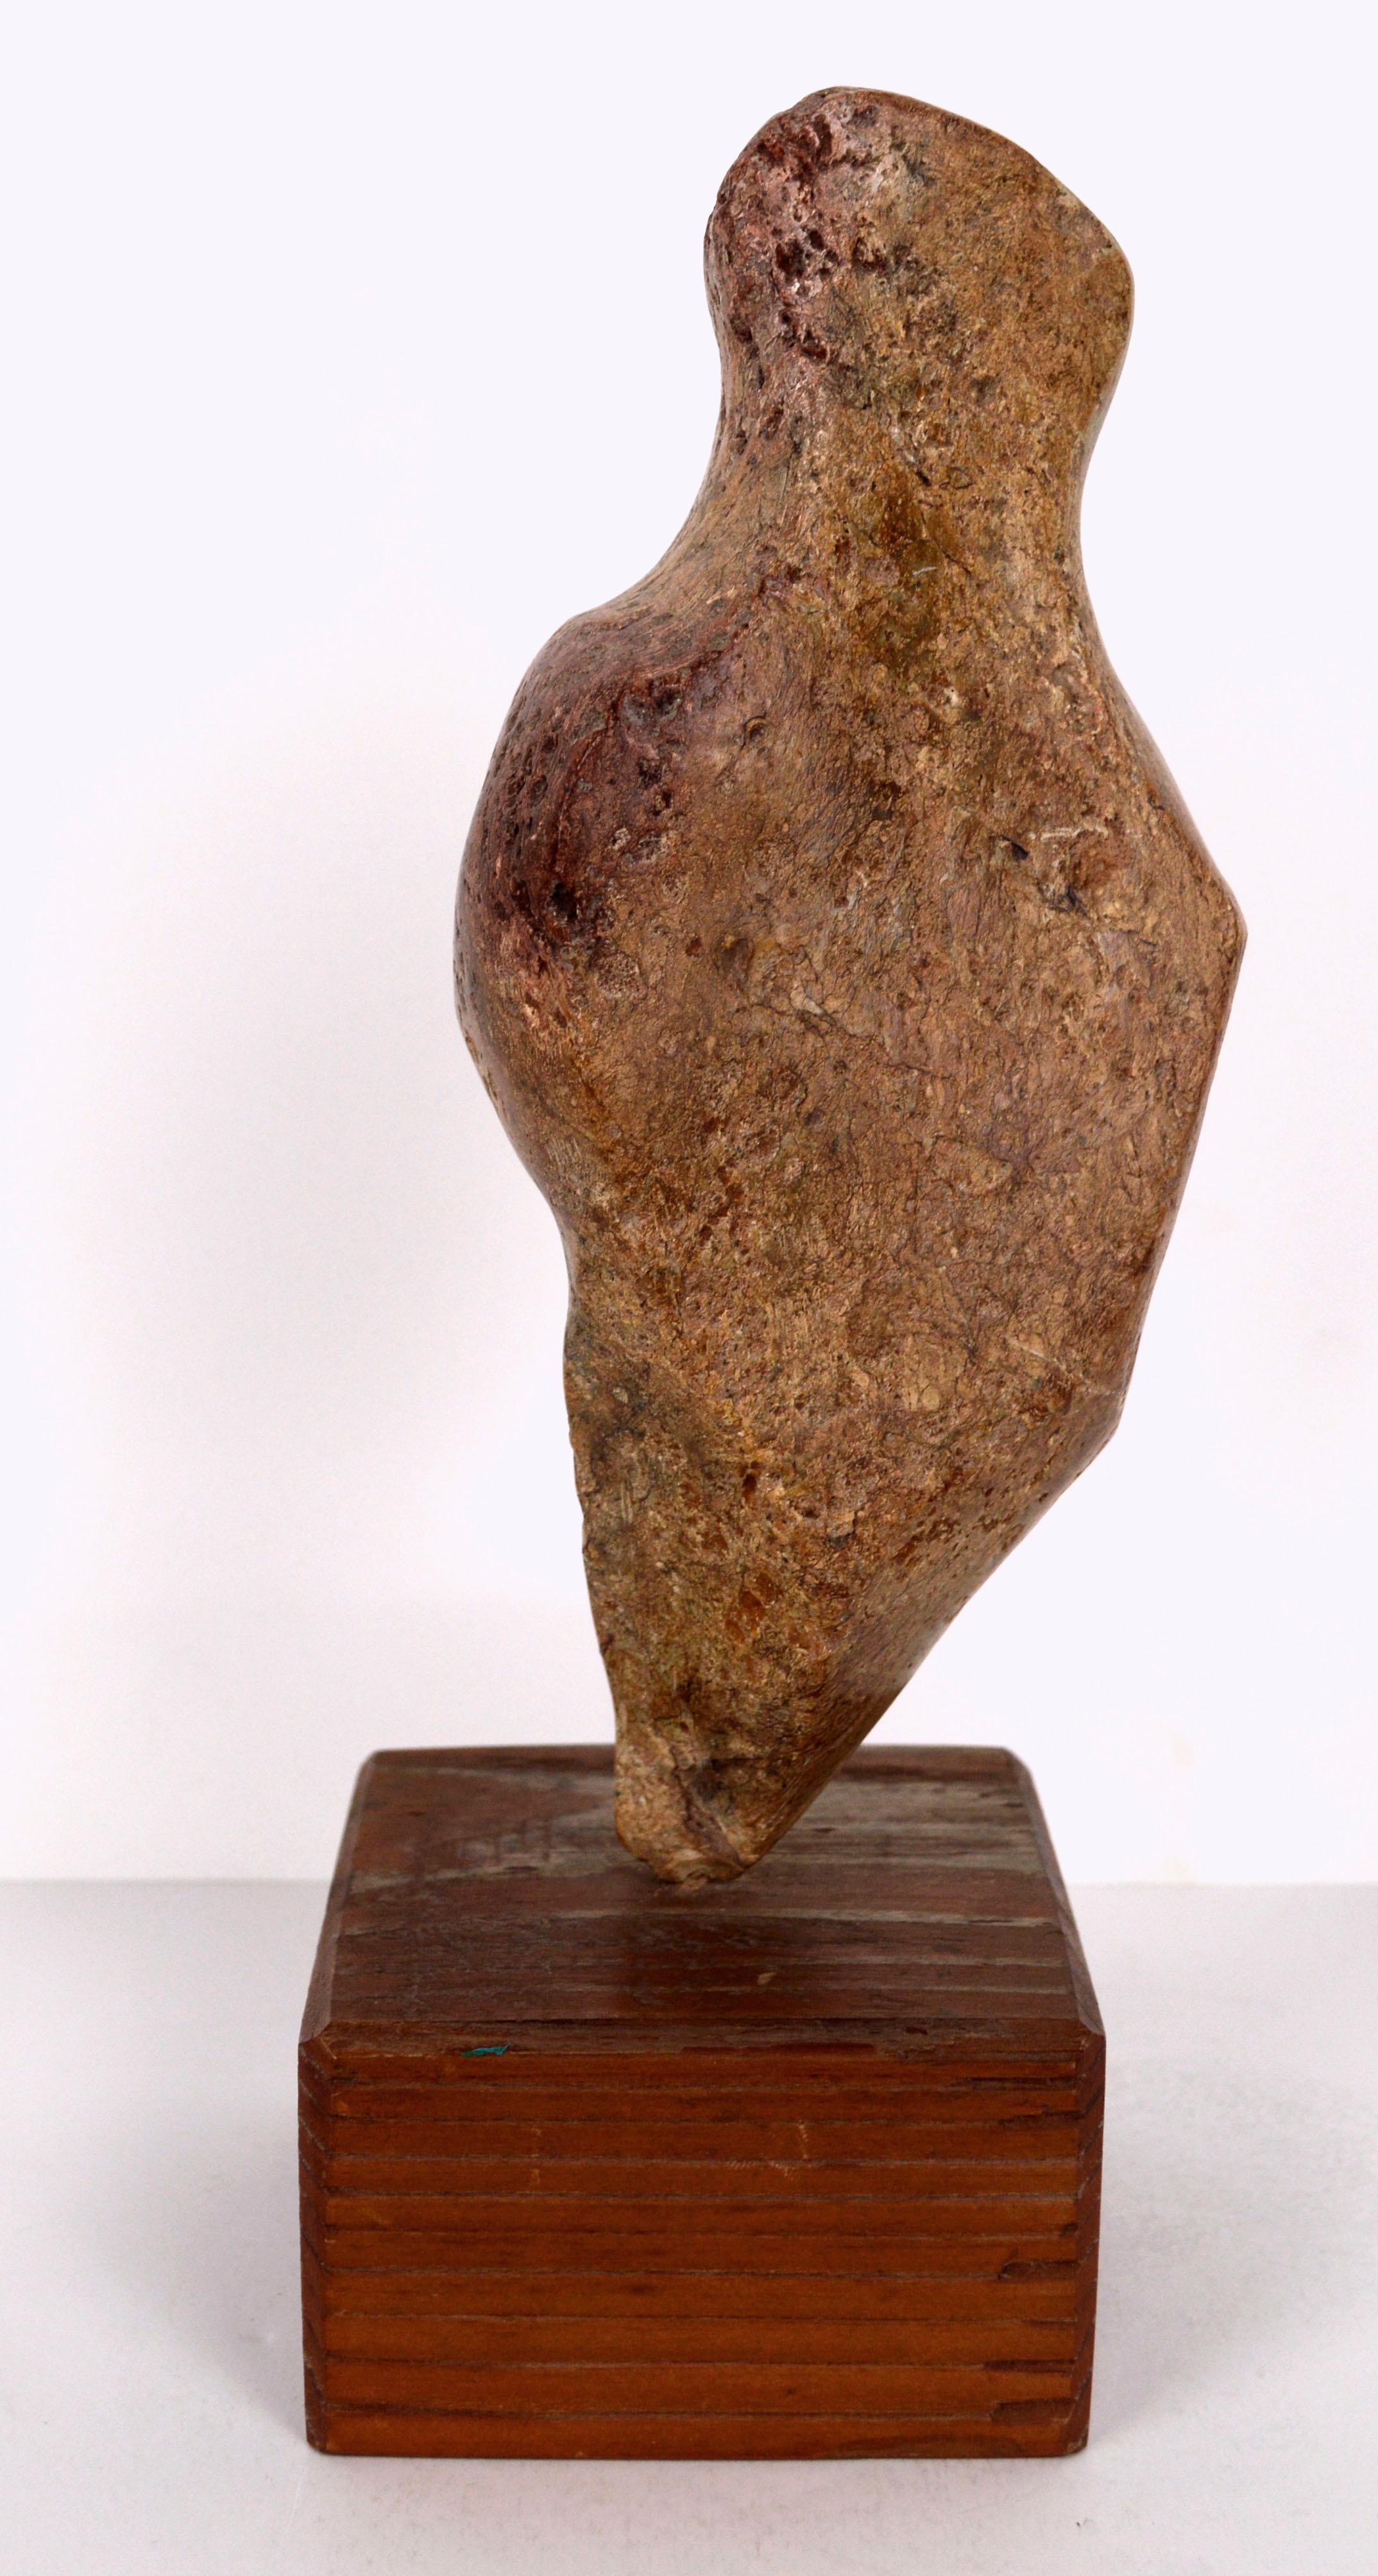  Wonderful small scale abstract figurative stone Venus sculpture by Doris Ann Warner (American, 1925-2010), 1975. A highly abstracted female form is expressed through the organic, flowing lines that make up this biomorphic form, which has a soft yet